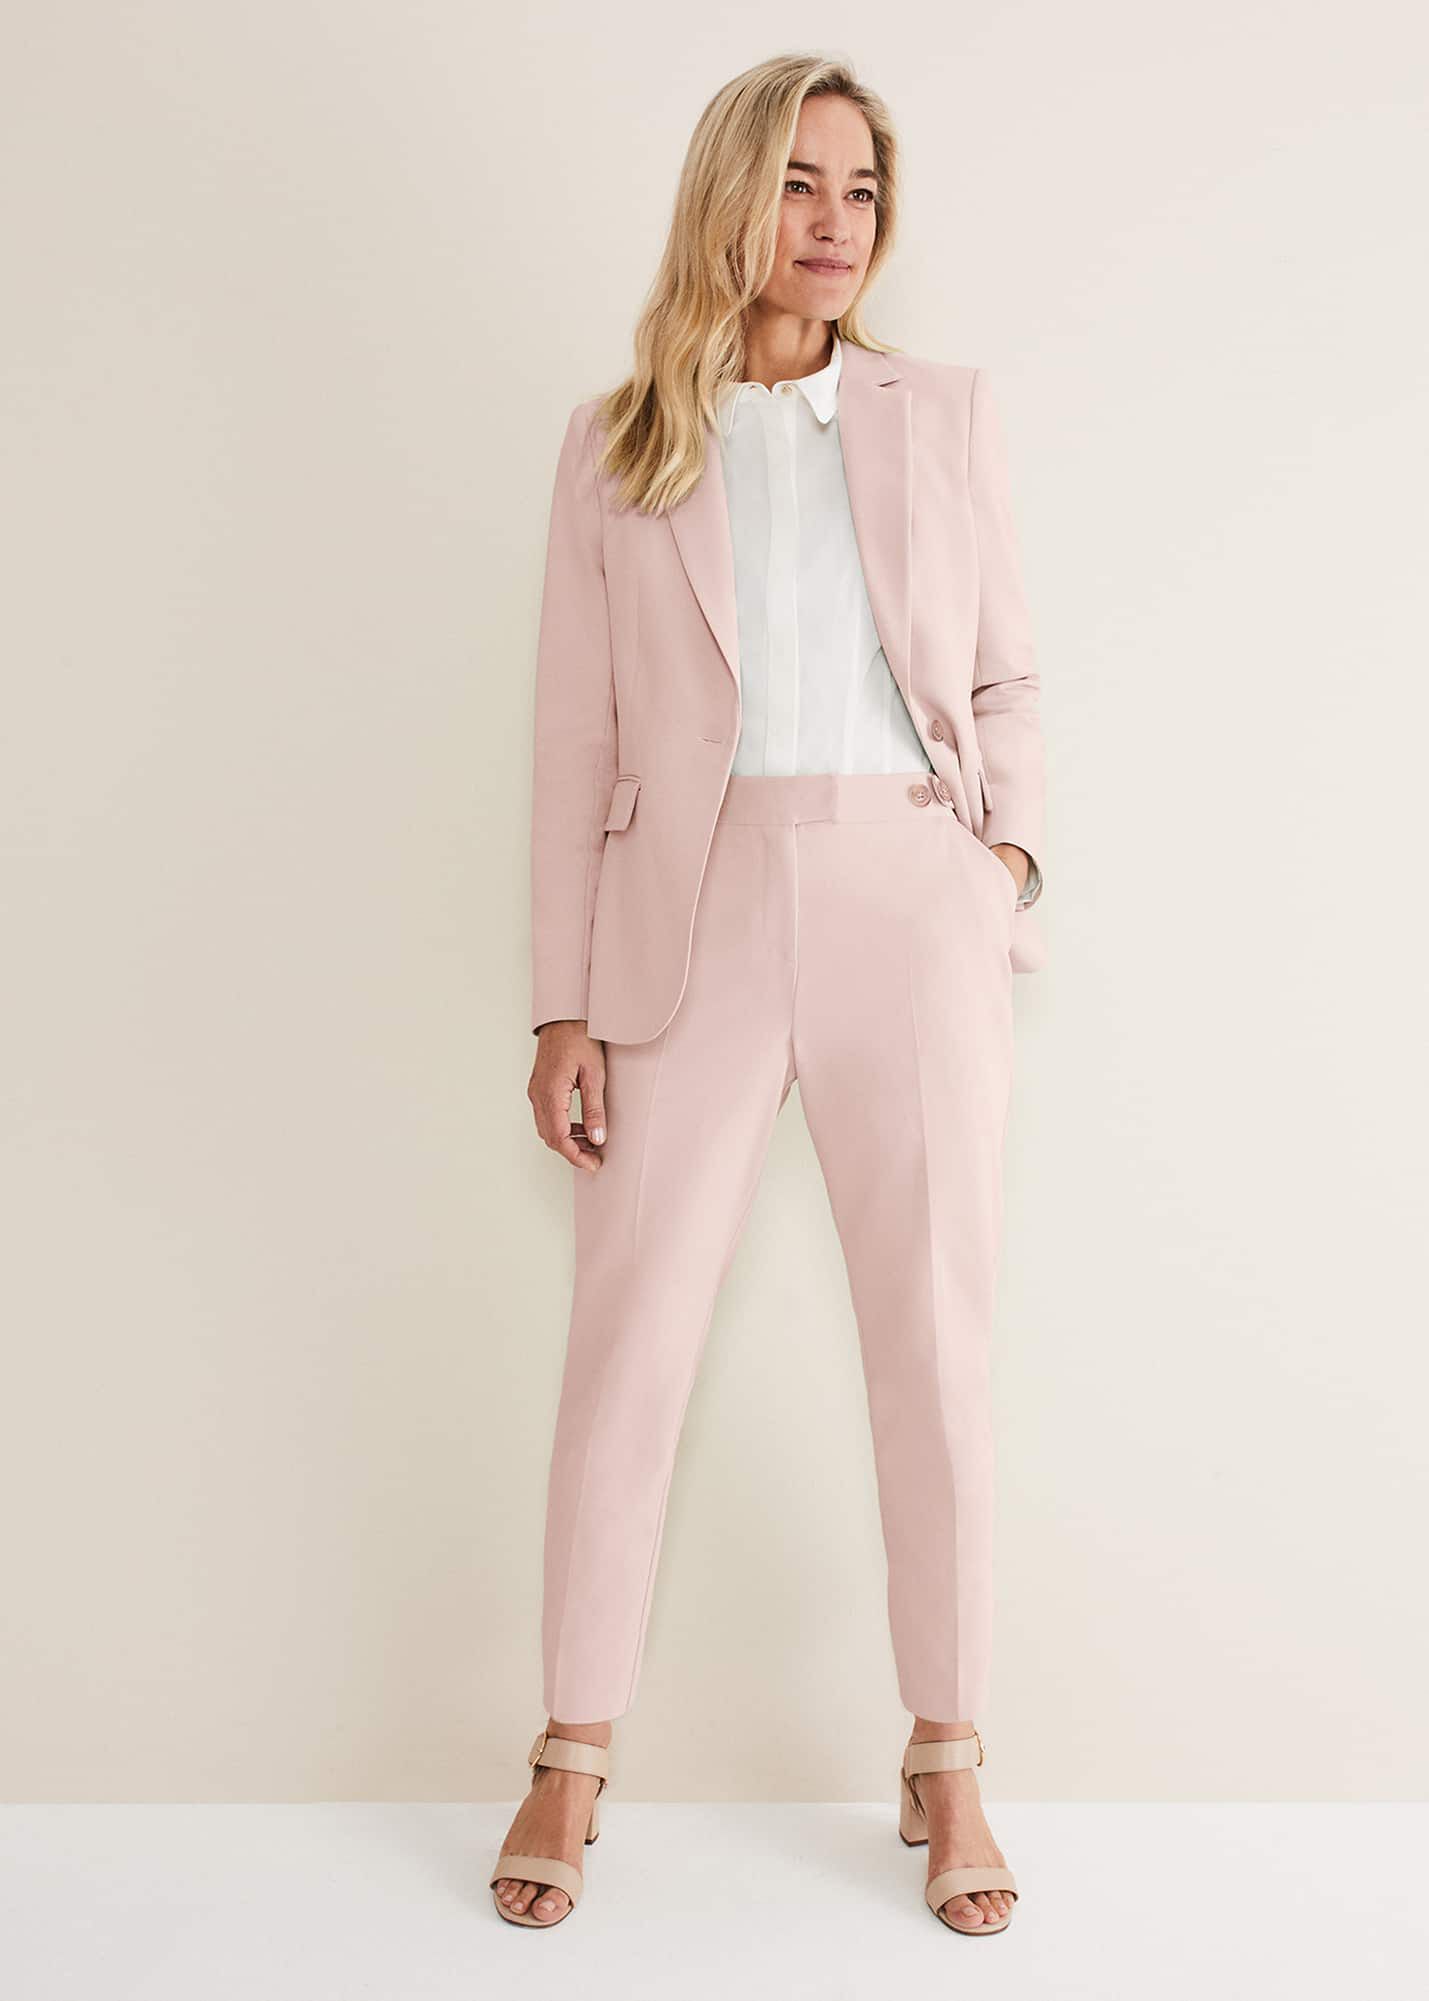 Womens Suits  Separates  Phase Eight 